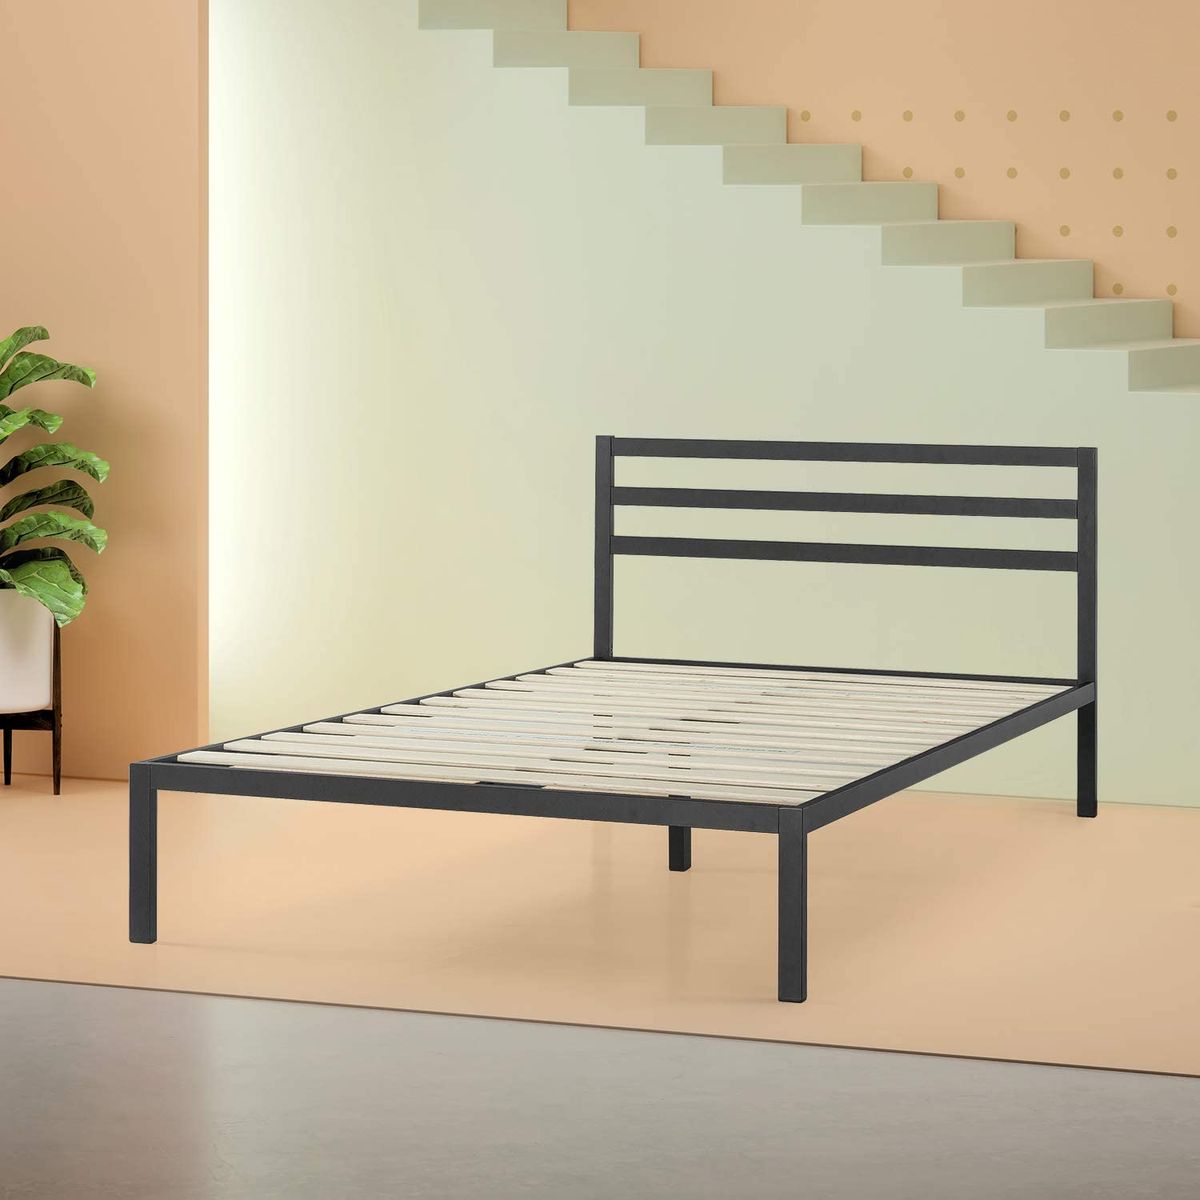 19 Best Metal Bed Frames 2020 The, Platform Bed Frame You Can Attach Headboard To